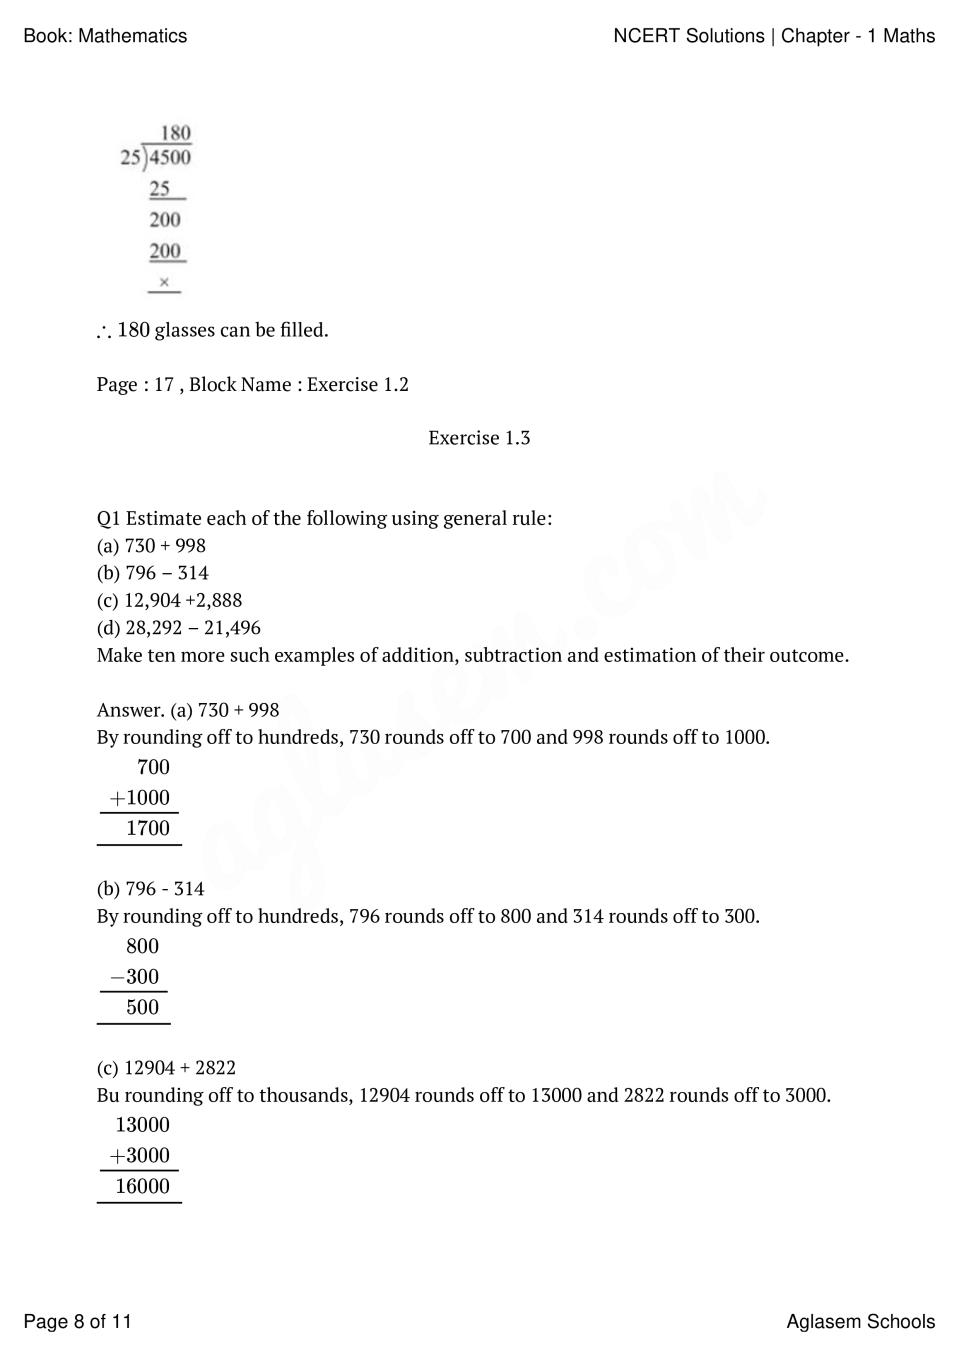 ncert-solutions-for-class-6-maths-chapter-1-knowing-our-numbers-pdf